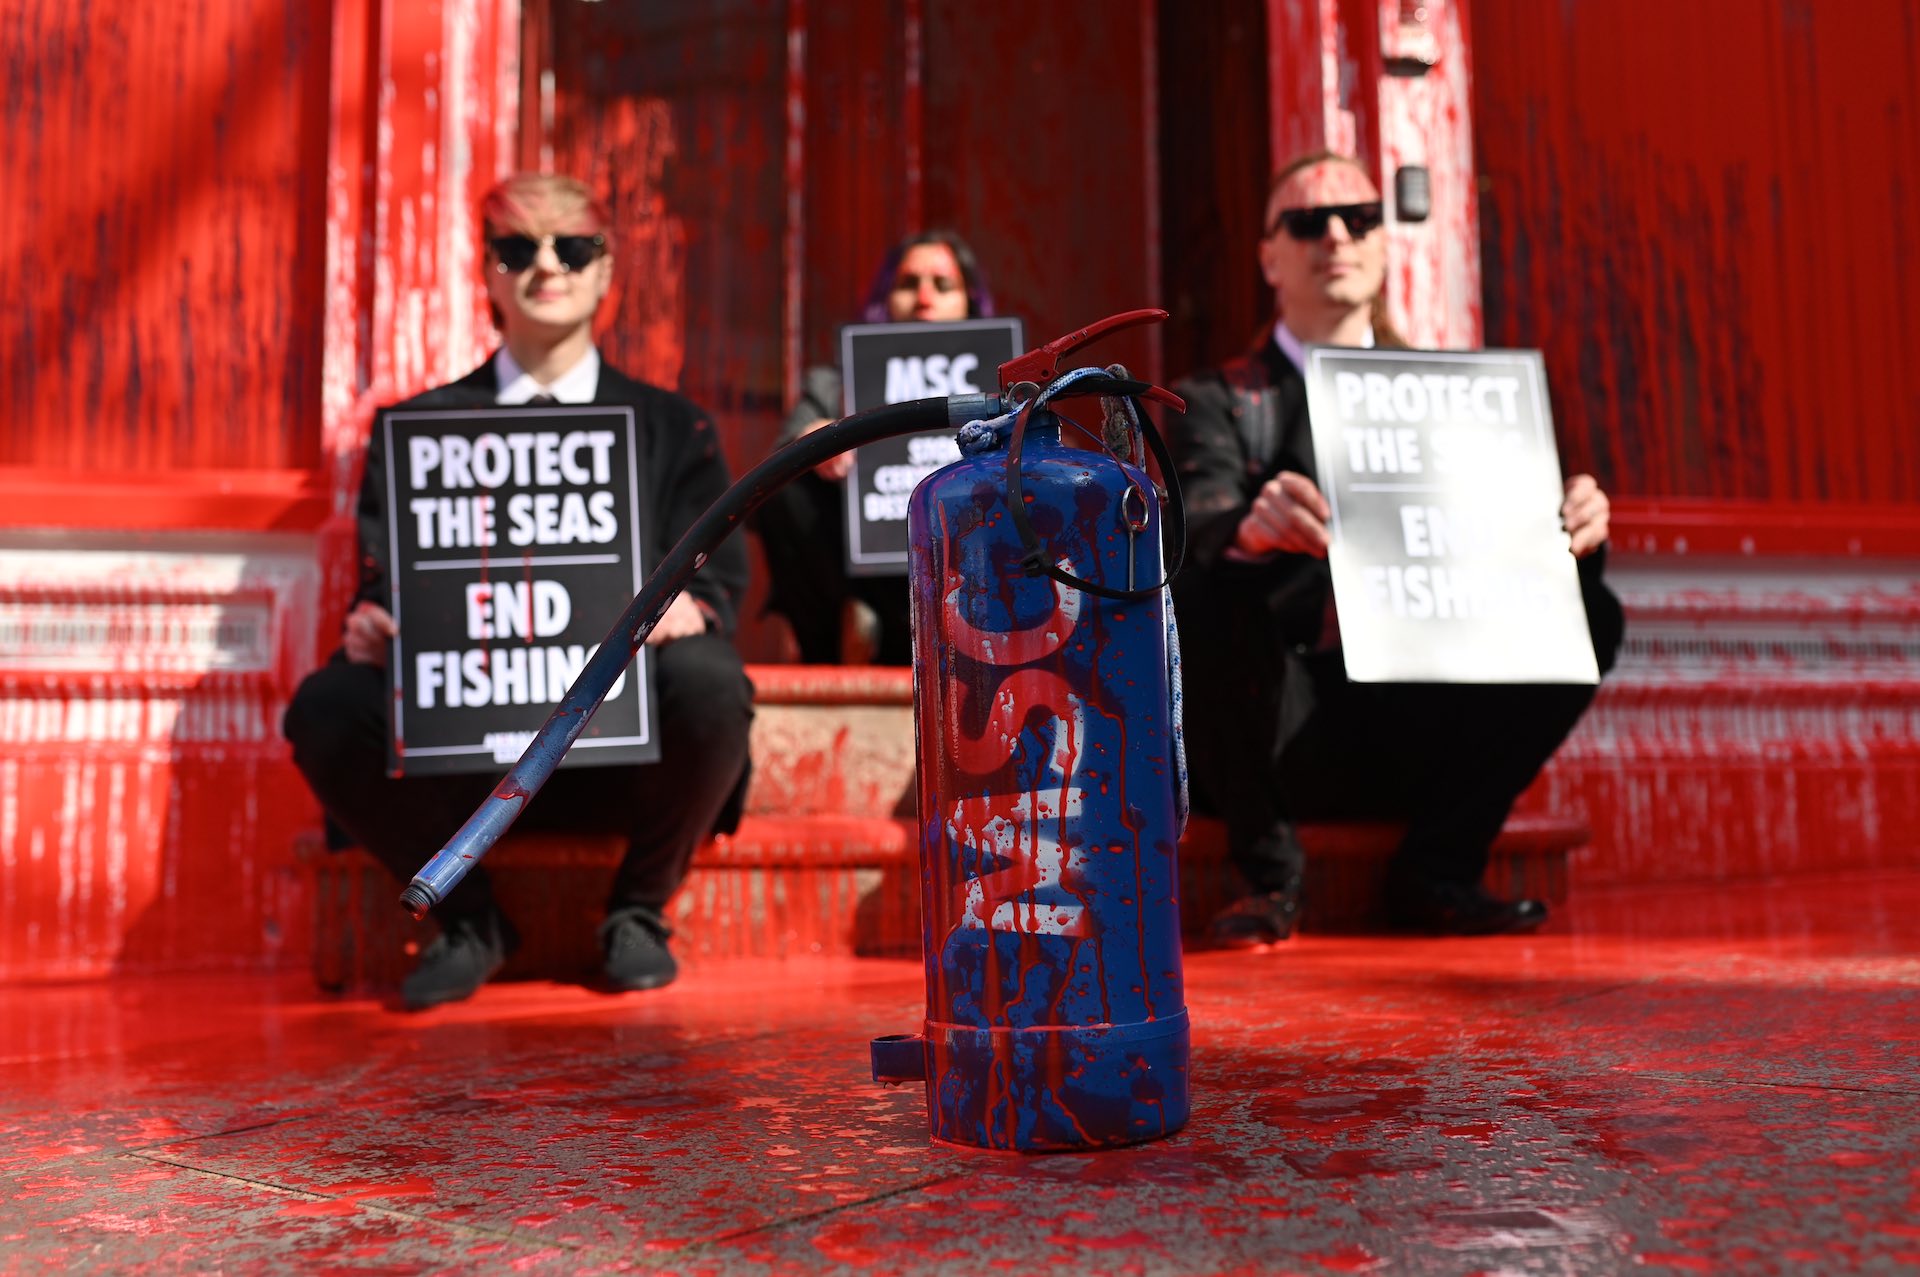 Photo of animal Rebellion activists sitting on a step with placards at the entrance to the Marine Stewardship Council. The building is normally white but has been stained bright red. A blue fire extinguisher with MSC written on it also has been splattered with red paint.